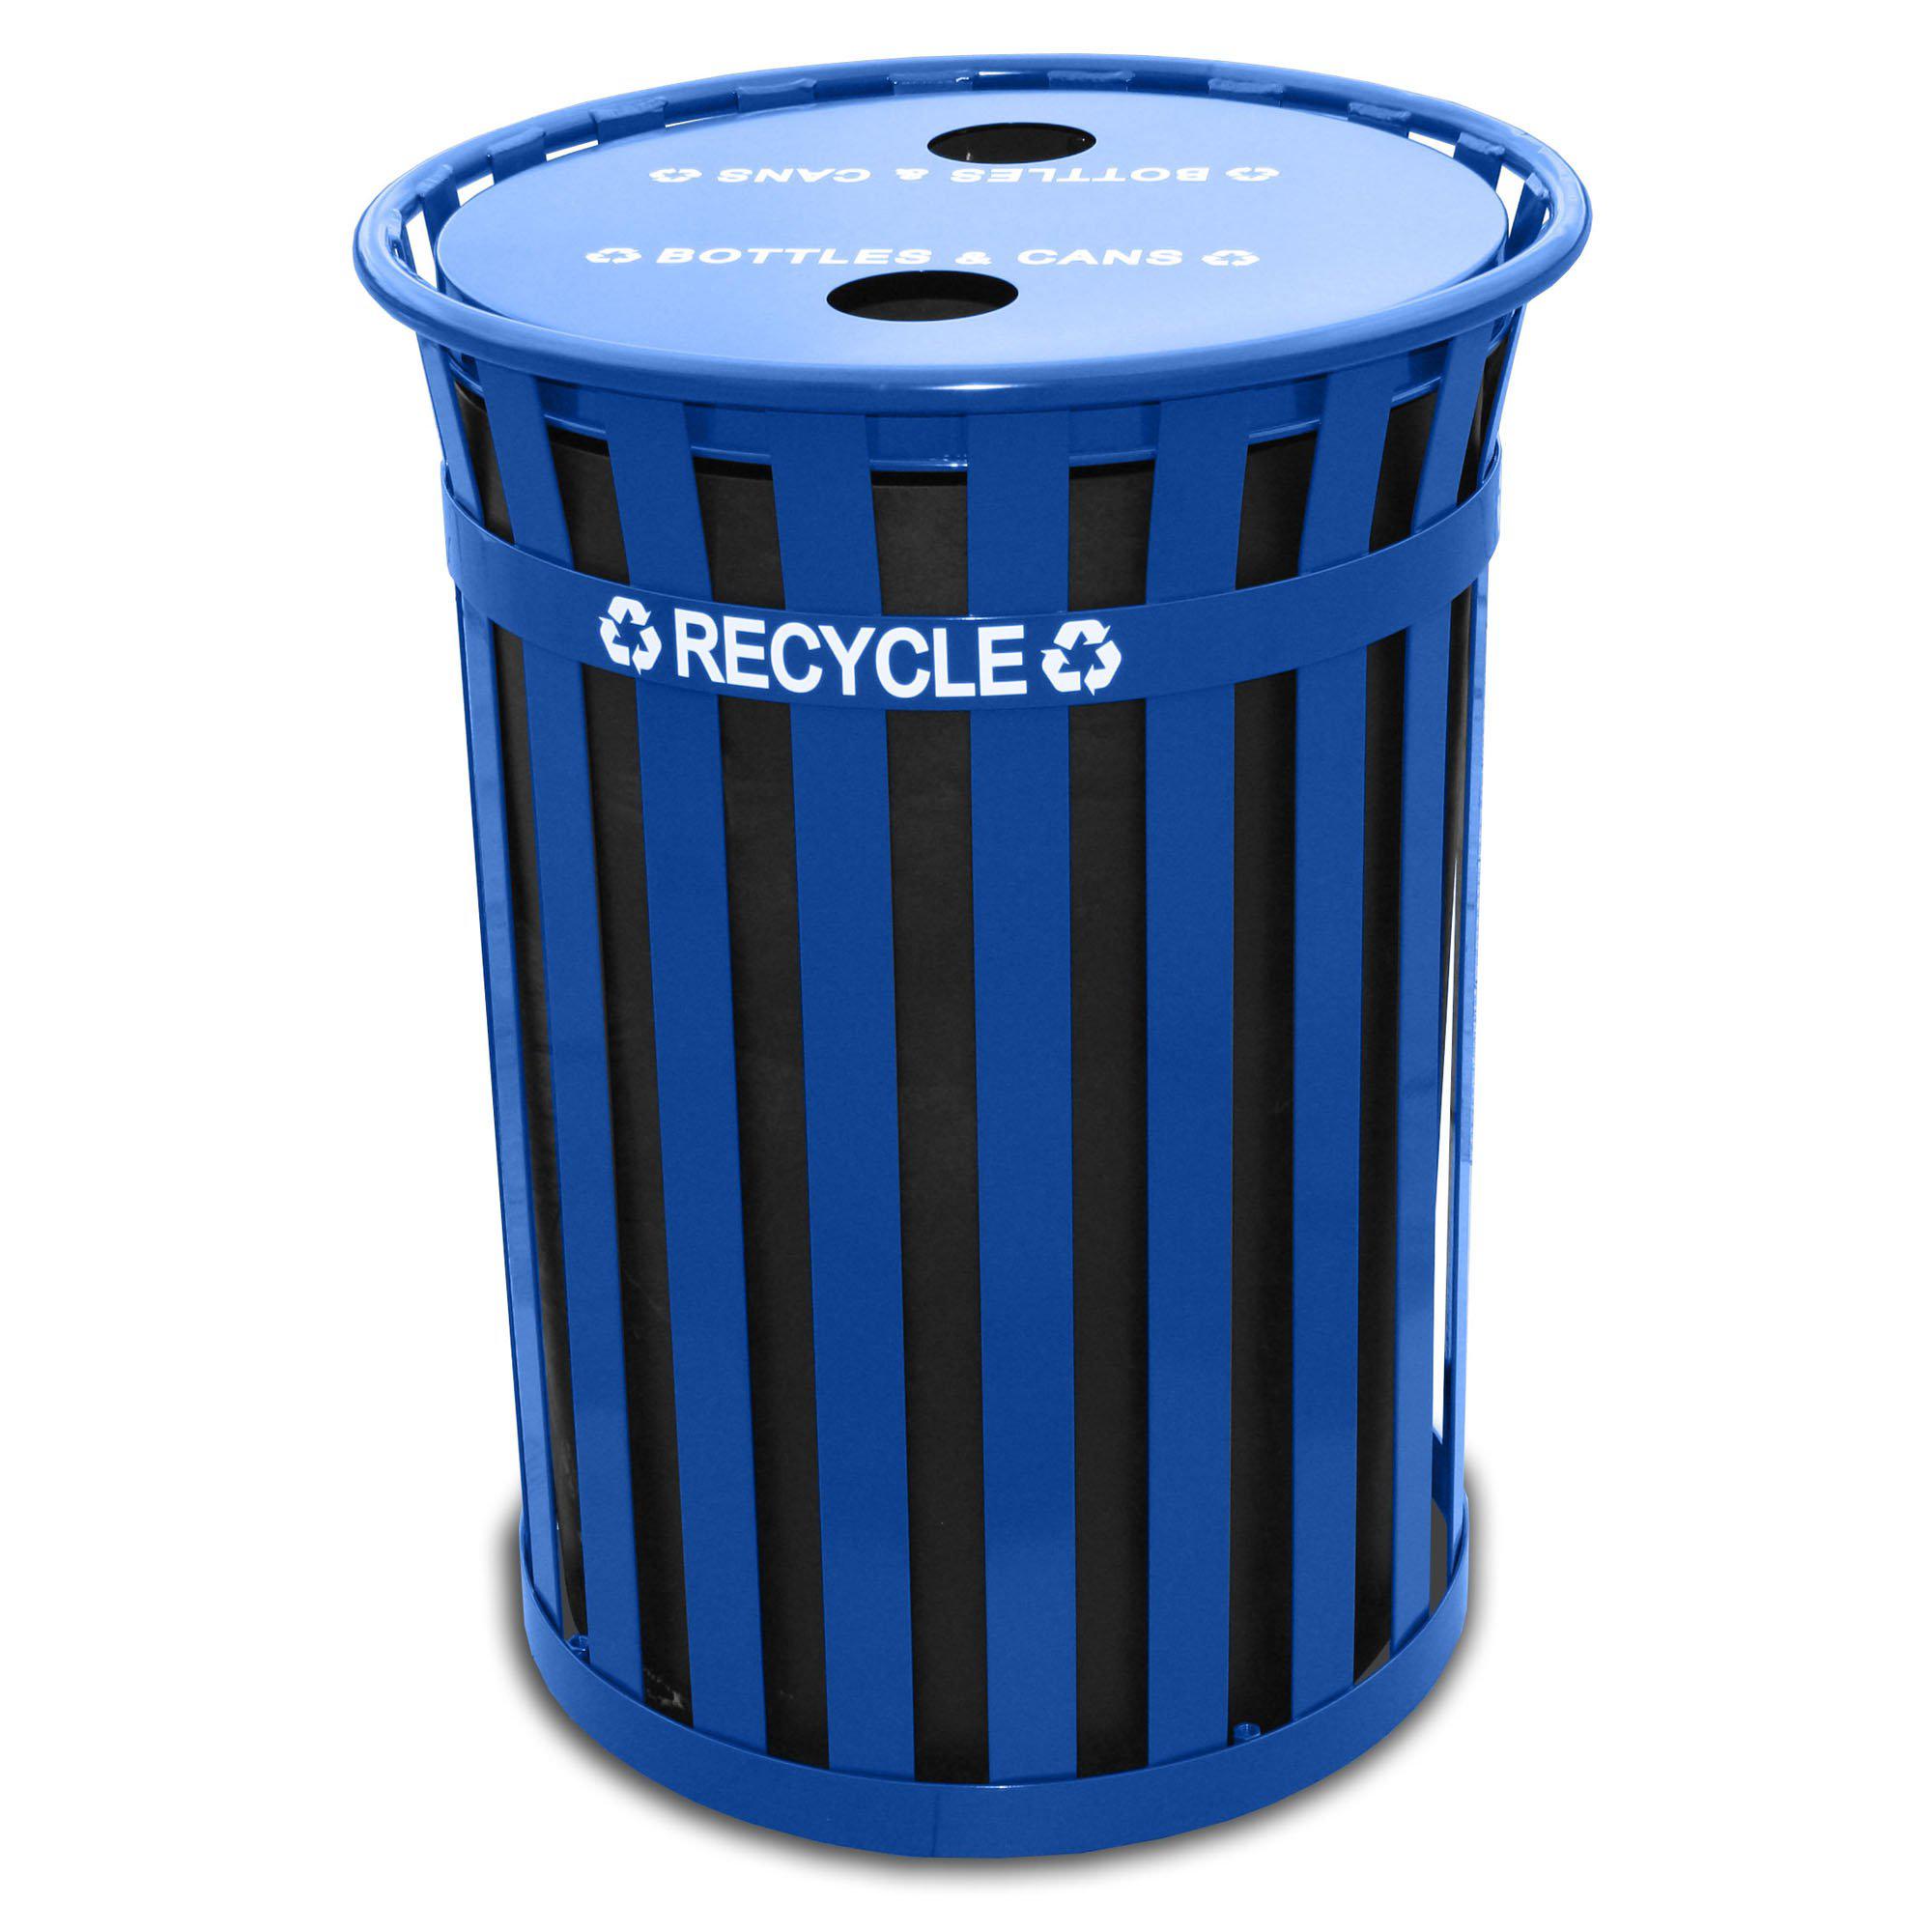 Oakley Collection Outdoor Single Stream Recycling Receptacle, Flat Top with 2 Openings, 50 Gallon Capacity